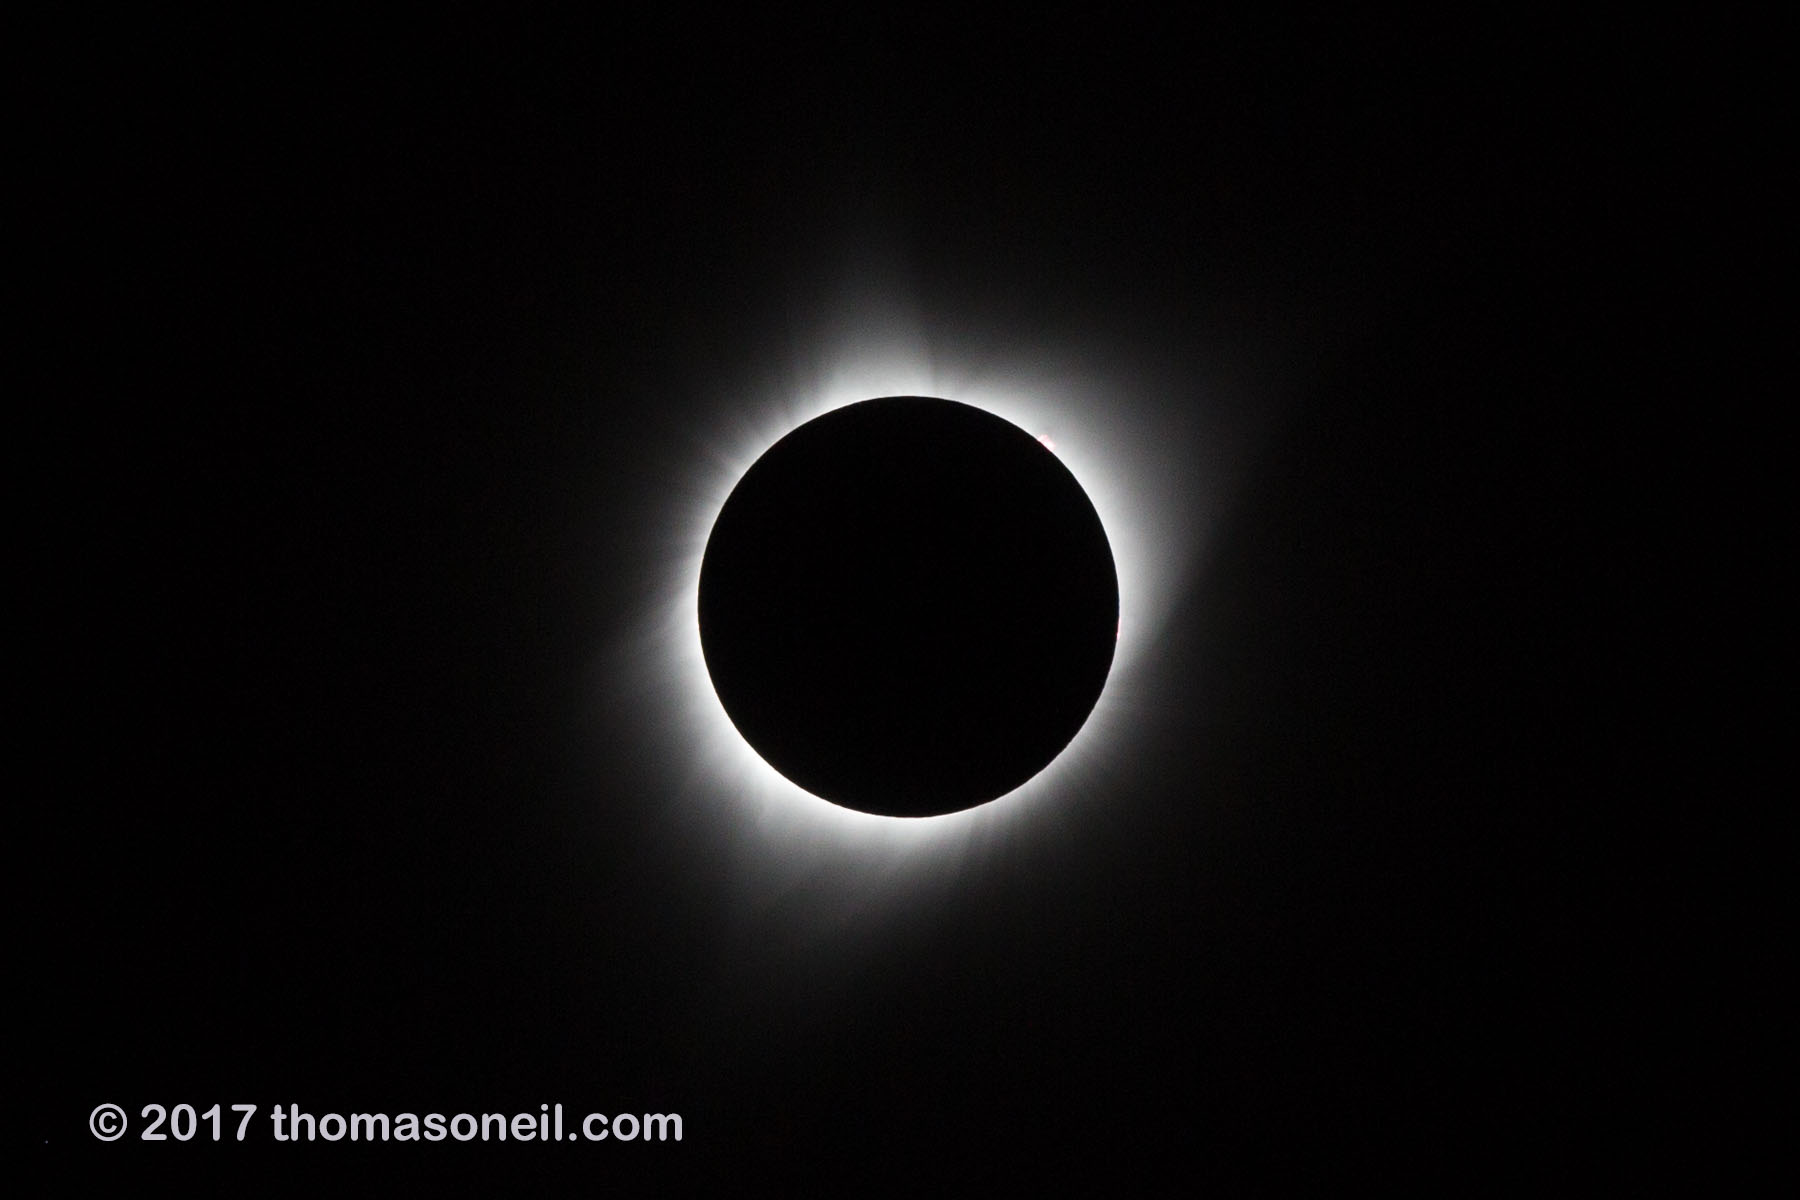 Solar eclipse, Aug. 21, 2017, faster shutter speed of 1/640 shows less of the corona and more of the details near the surface.  Click for next photo.